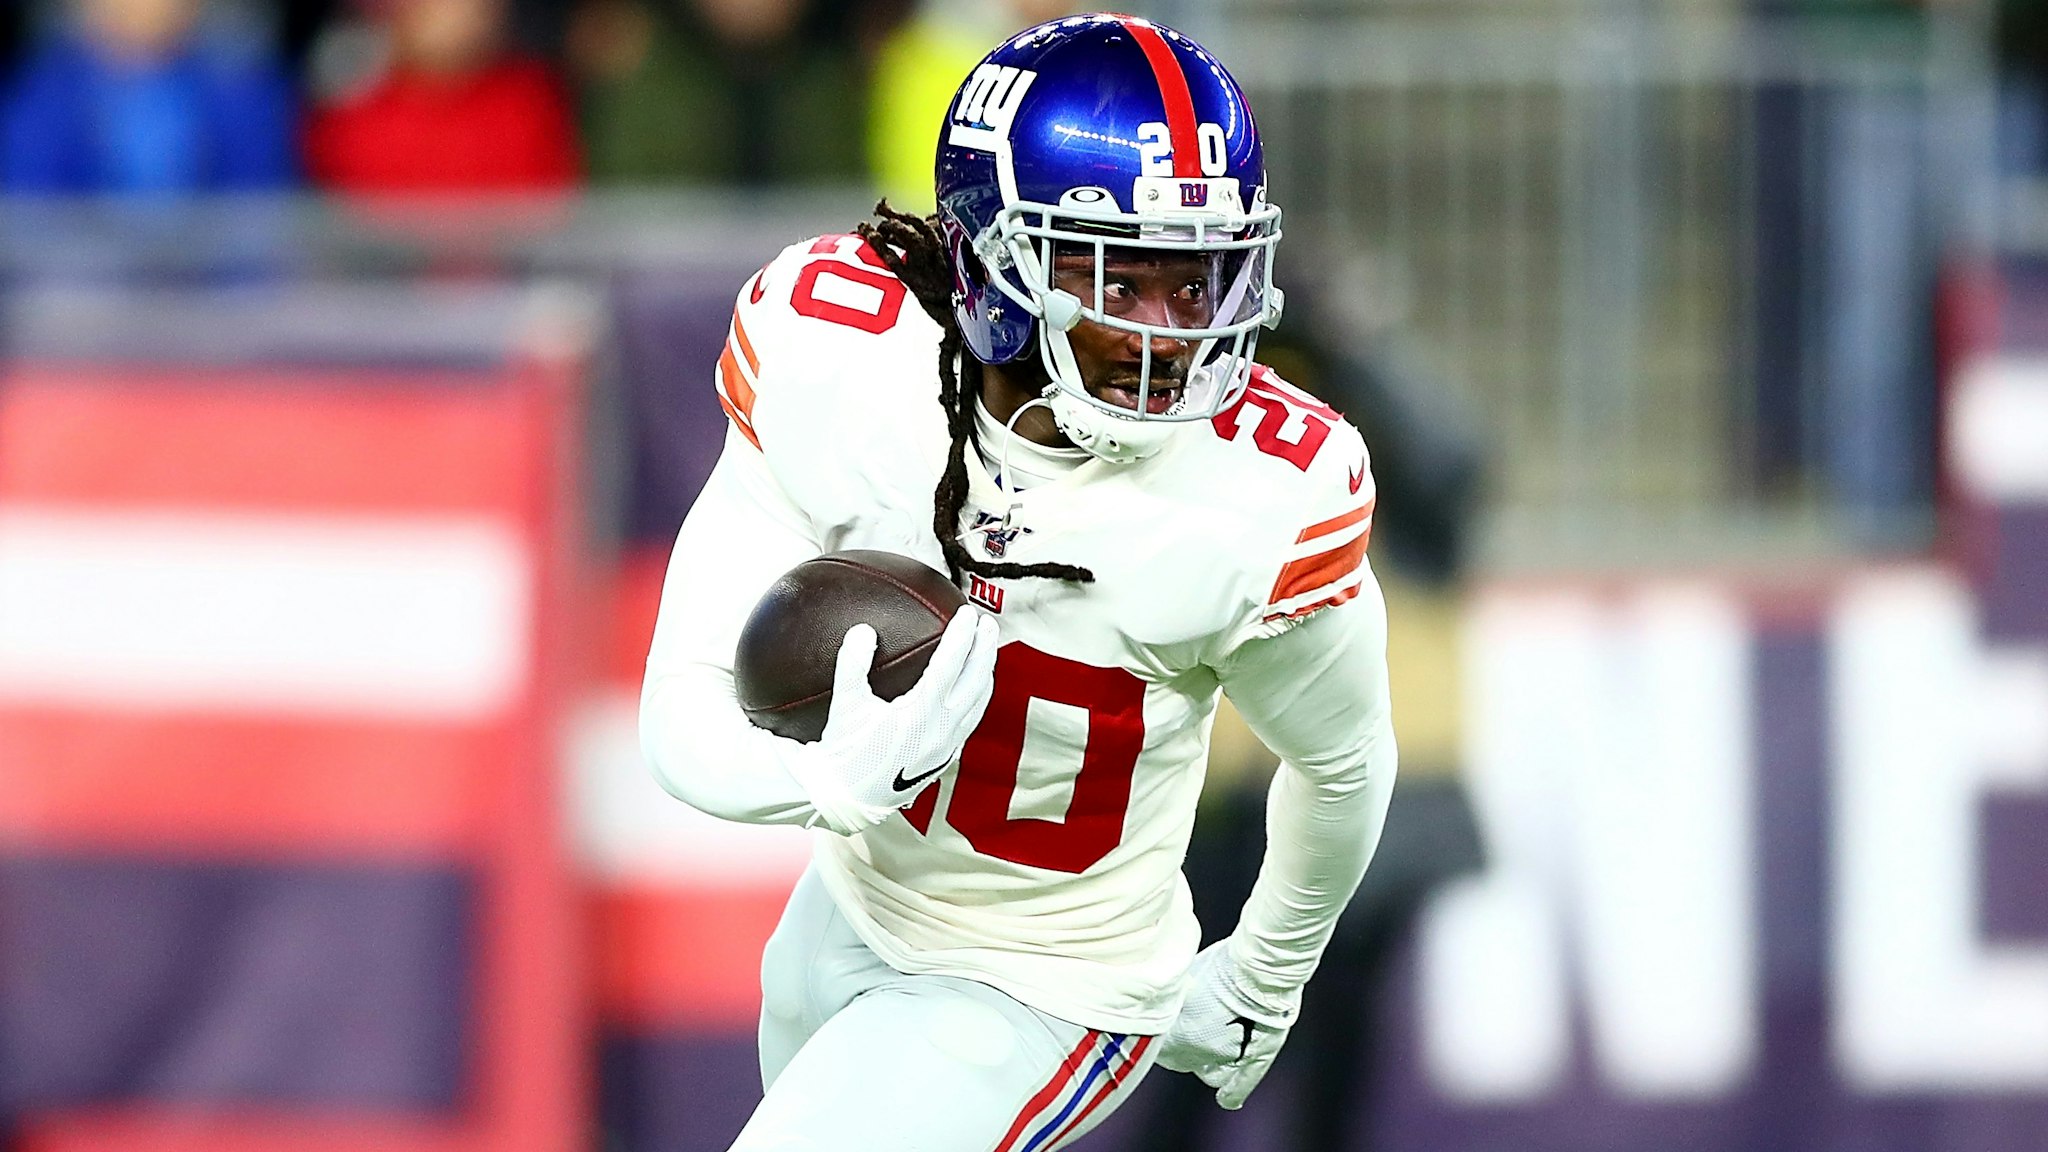 FOXBOROUGH, MASSACHUSETTS - OCTOBER 10: Janoris Jenkins #20 of the New York Giants intercepts a ball intended for Julian Edelman #11 of the New England Patriots during the first quarter in the game at Gillette Stadium on October 10, 2019 in Foxborough, Massachusetts.